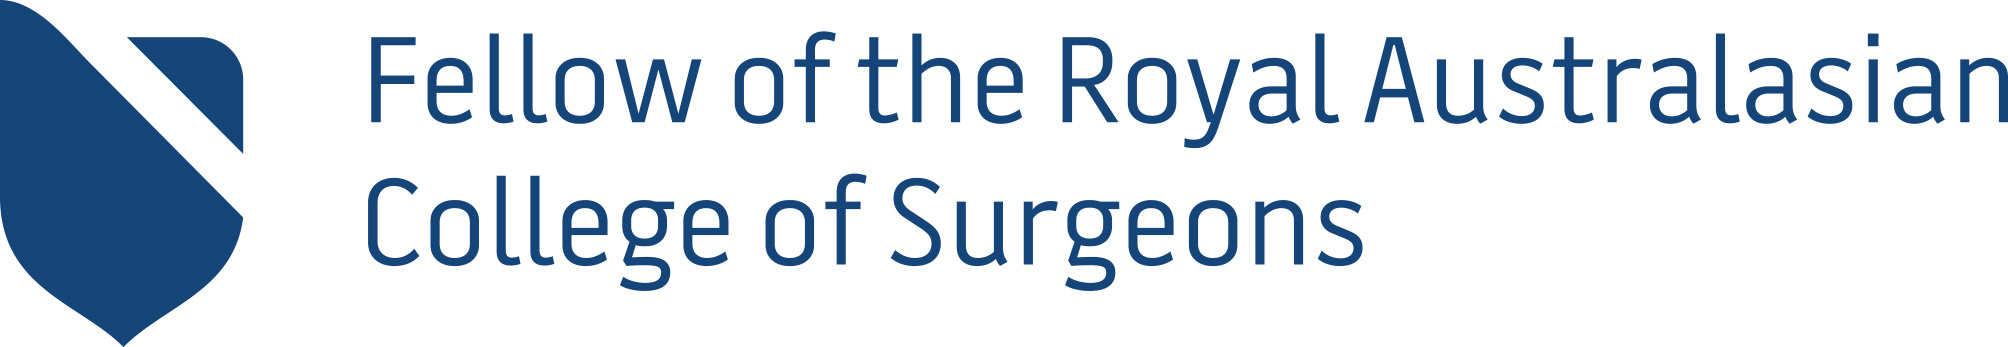 Fellow of the royal Australasian college of surgeons